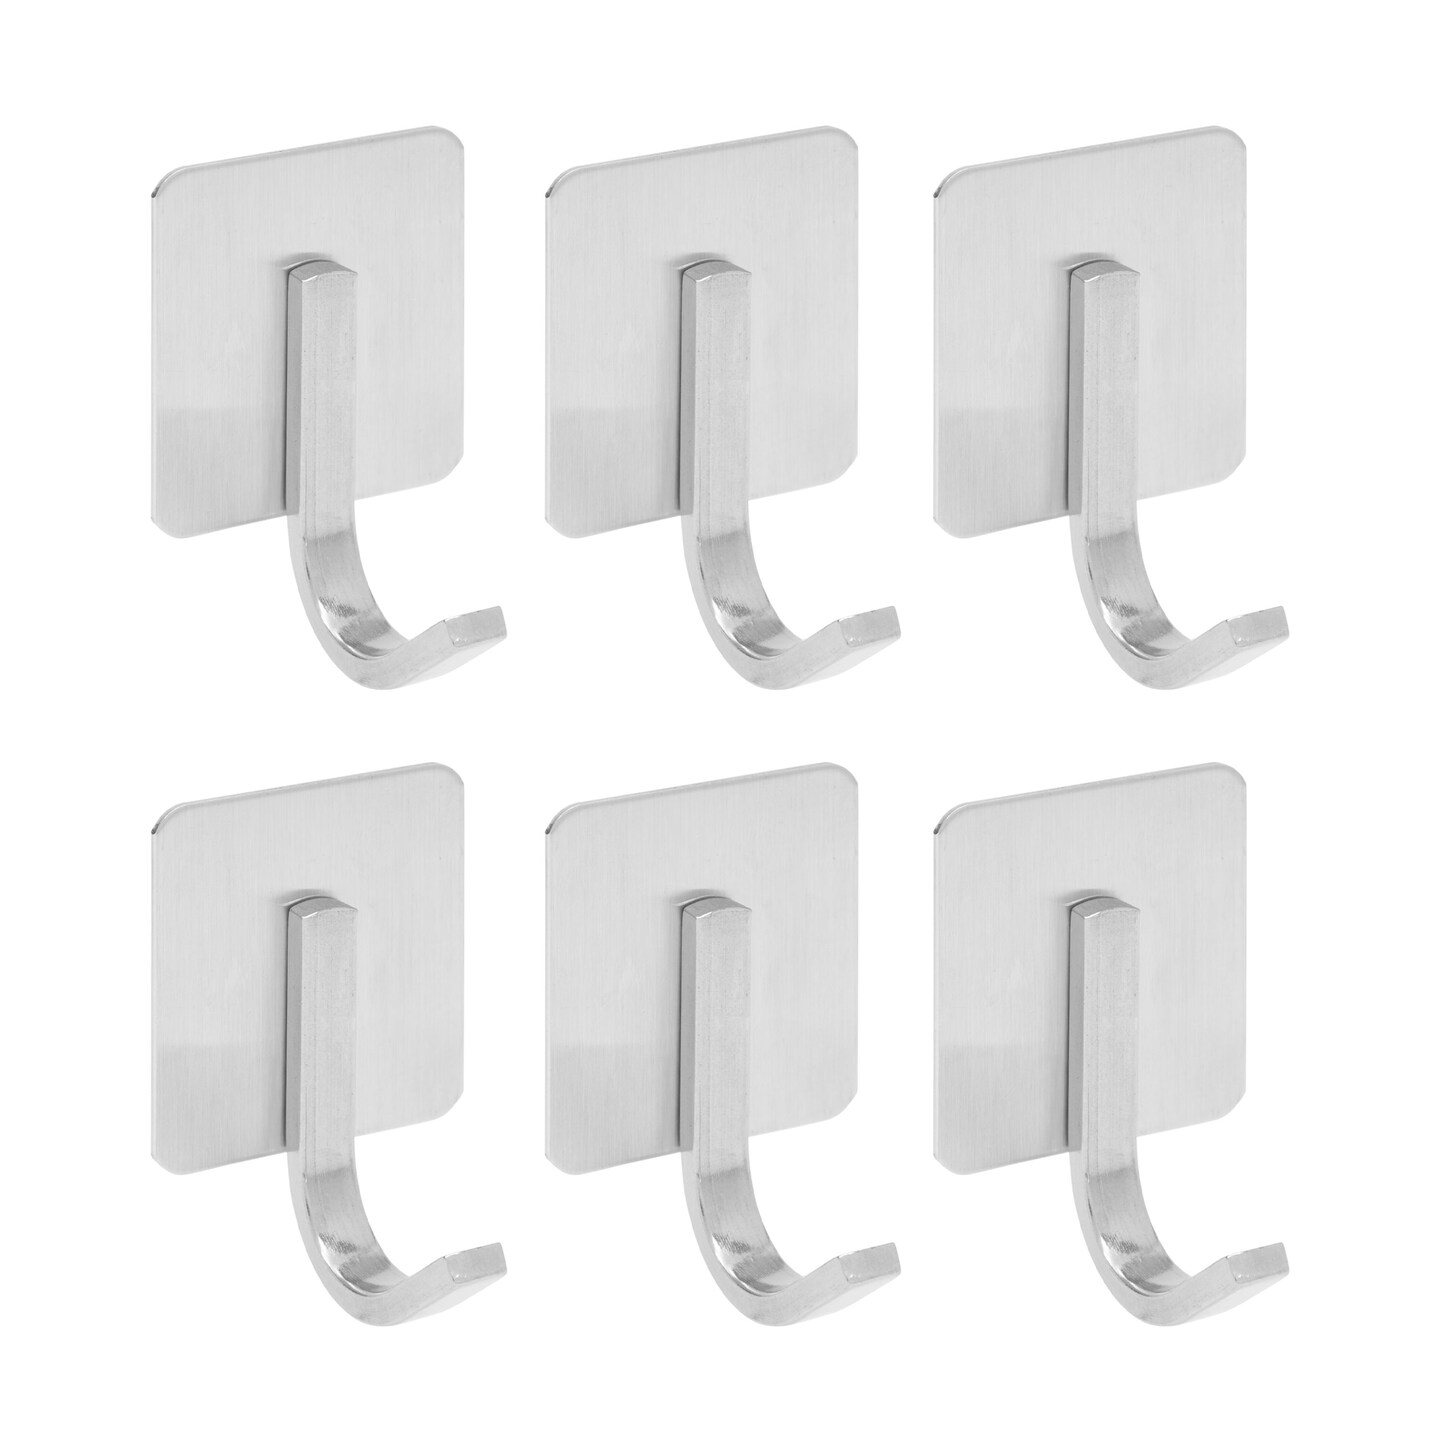 J Shape Adhesive Wall Hooks, Heavy Duty Stainless Steel for